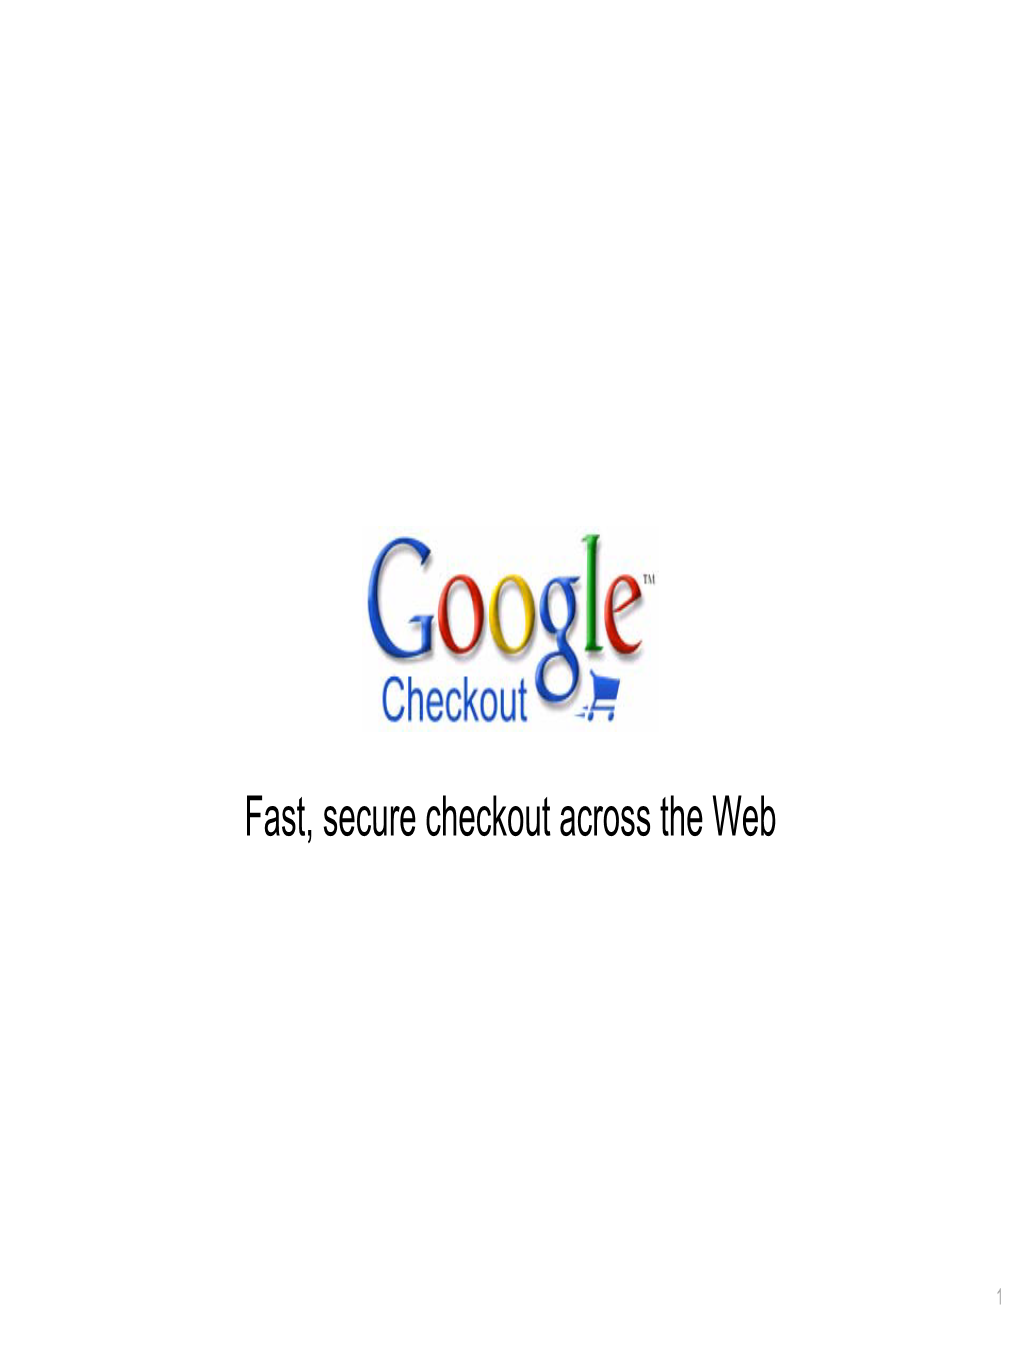 Fast, Secure Checkout Across the Web